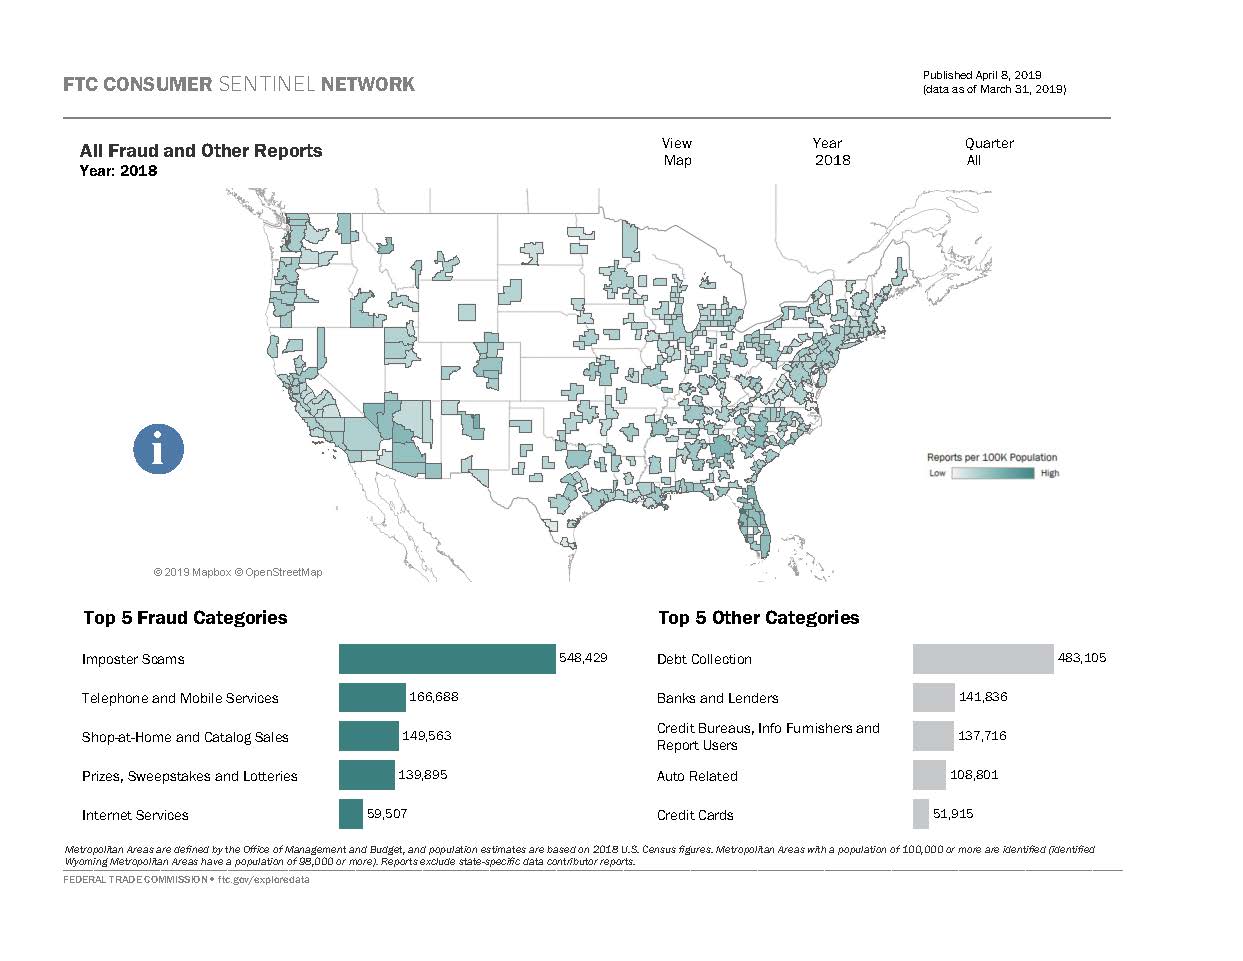 Link to interactive U.S. map and other visualizations showing fraud data by metro area based on consumer reports.